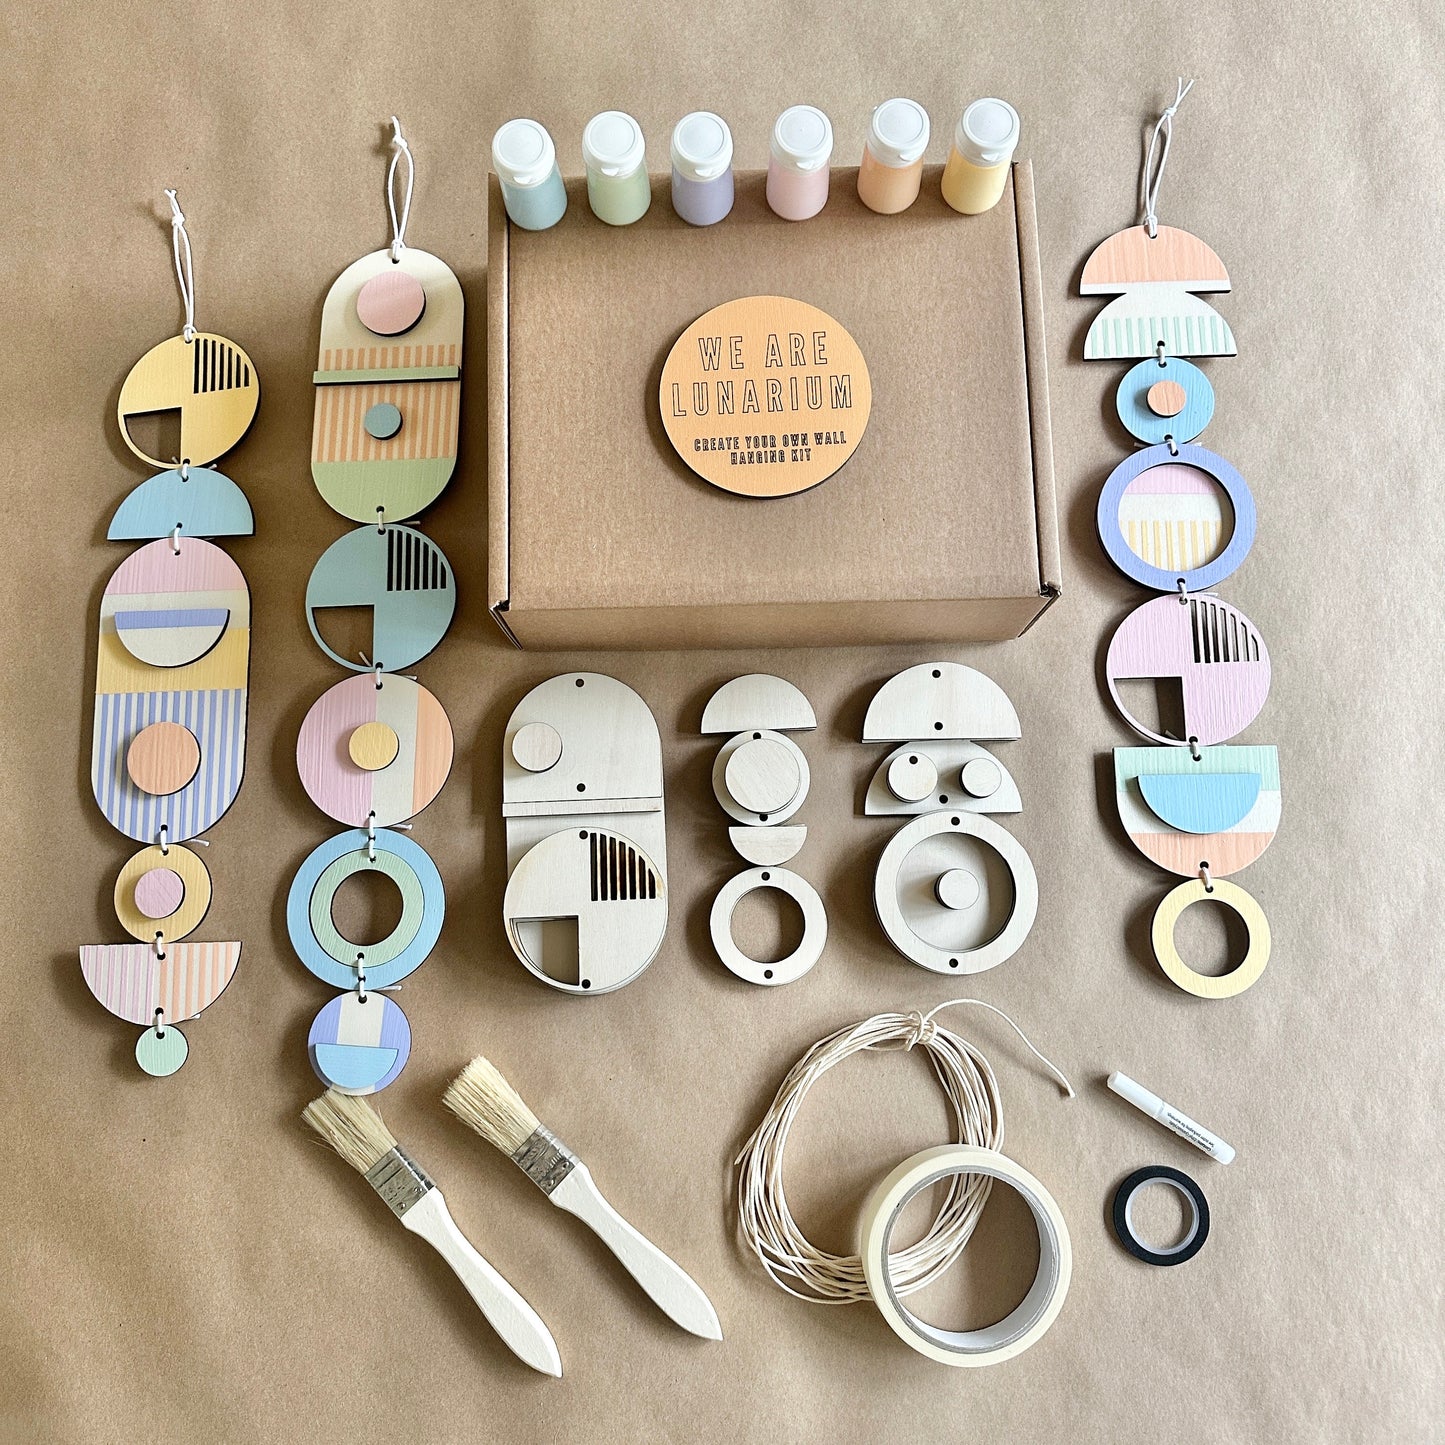 Pastel Rainbow DIY Wall Hanging Kit: Craft Your Own Serene Home Decor